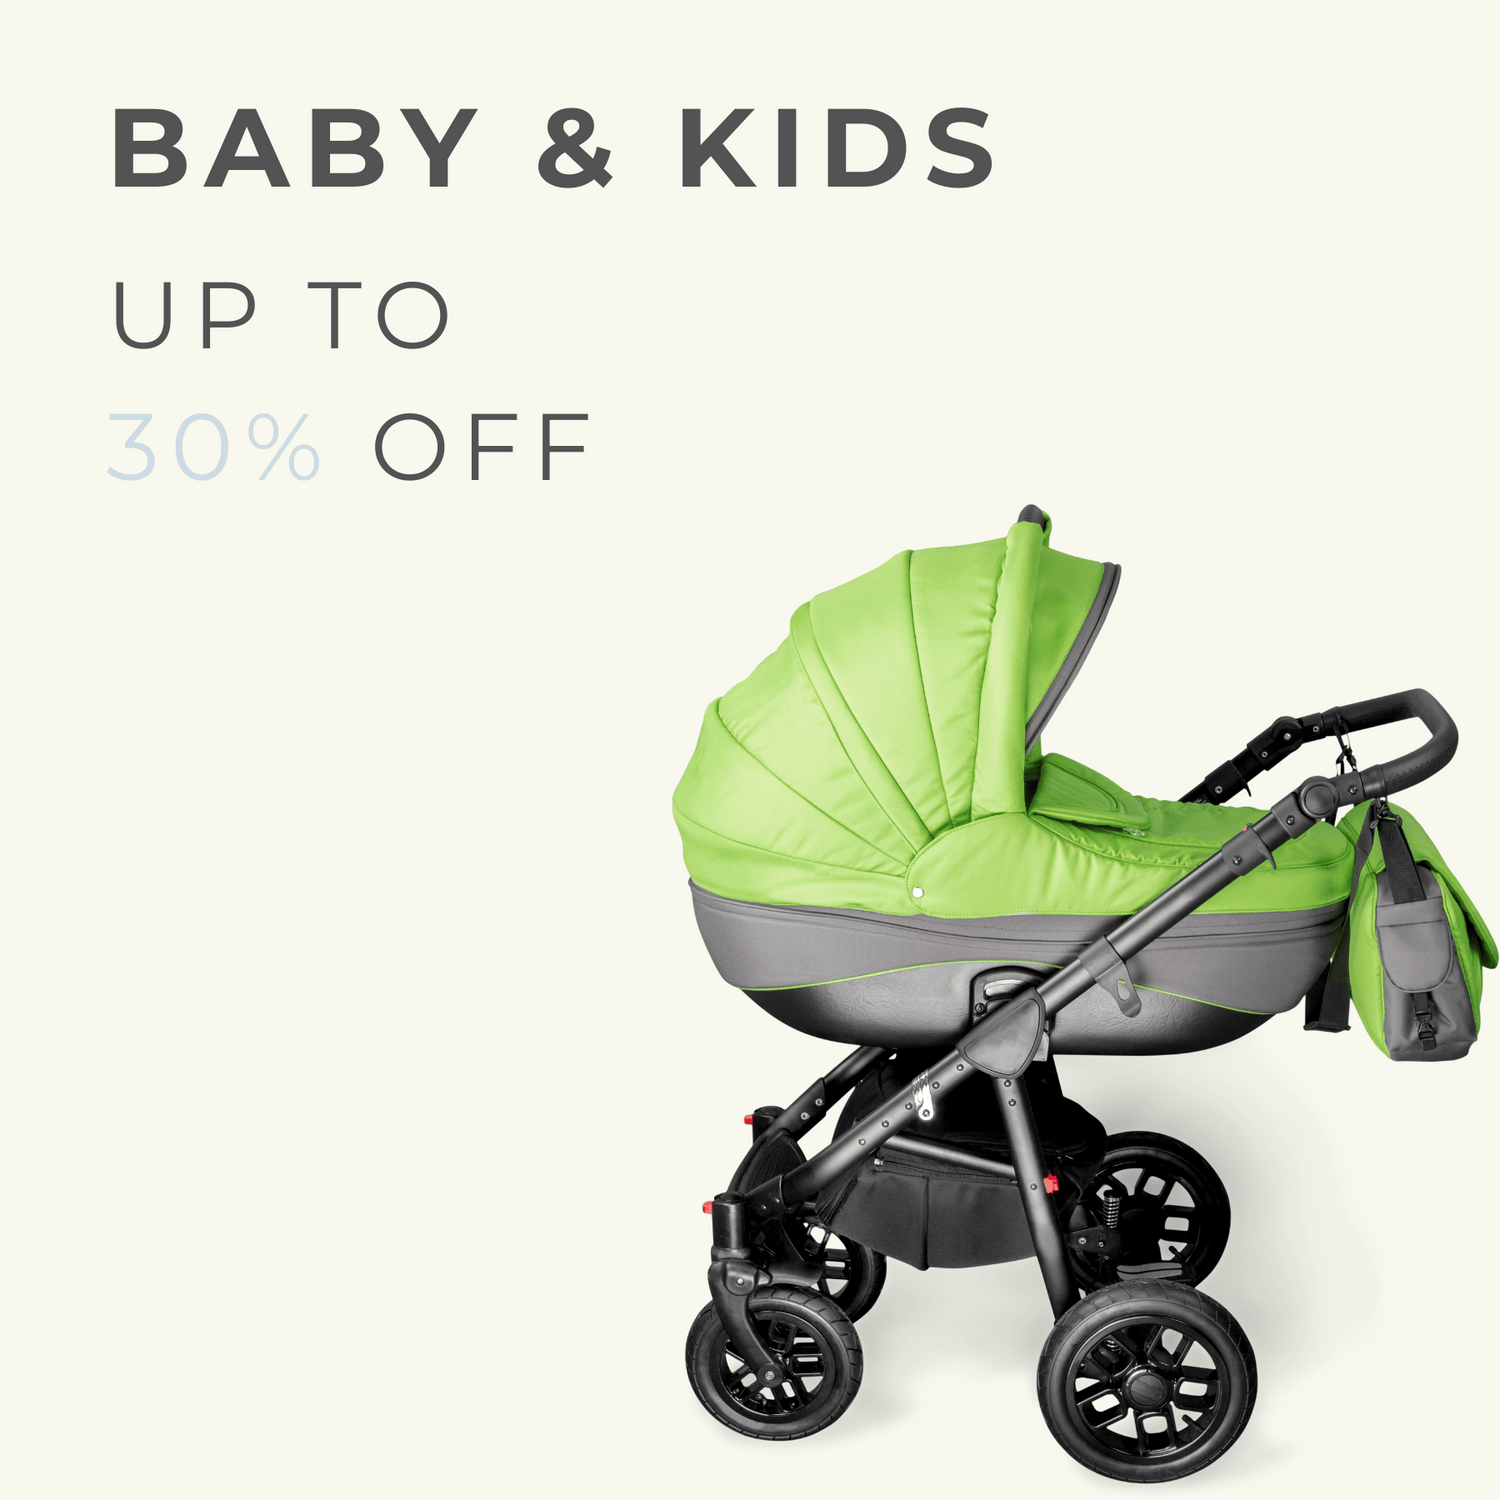 Modern lime green baby stroller against a white background, with promotional text 'BABY & KIDS UP TO 30% OFF', highlighting a sale on children's products.